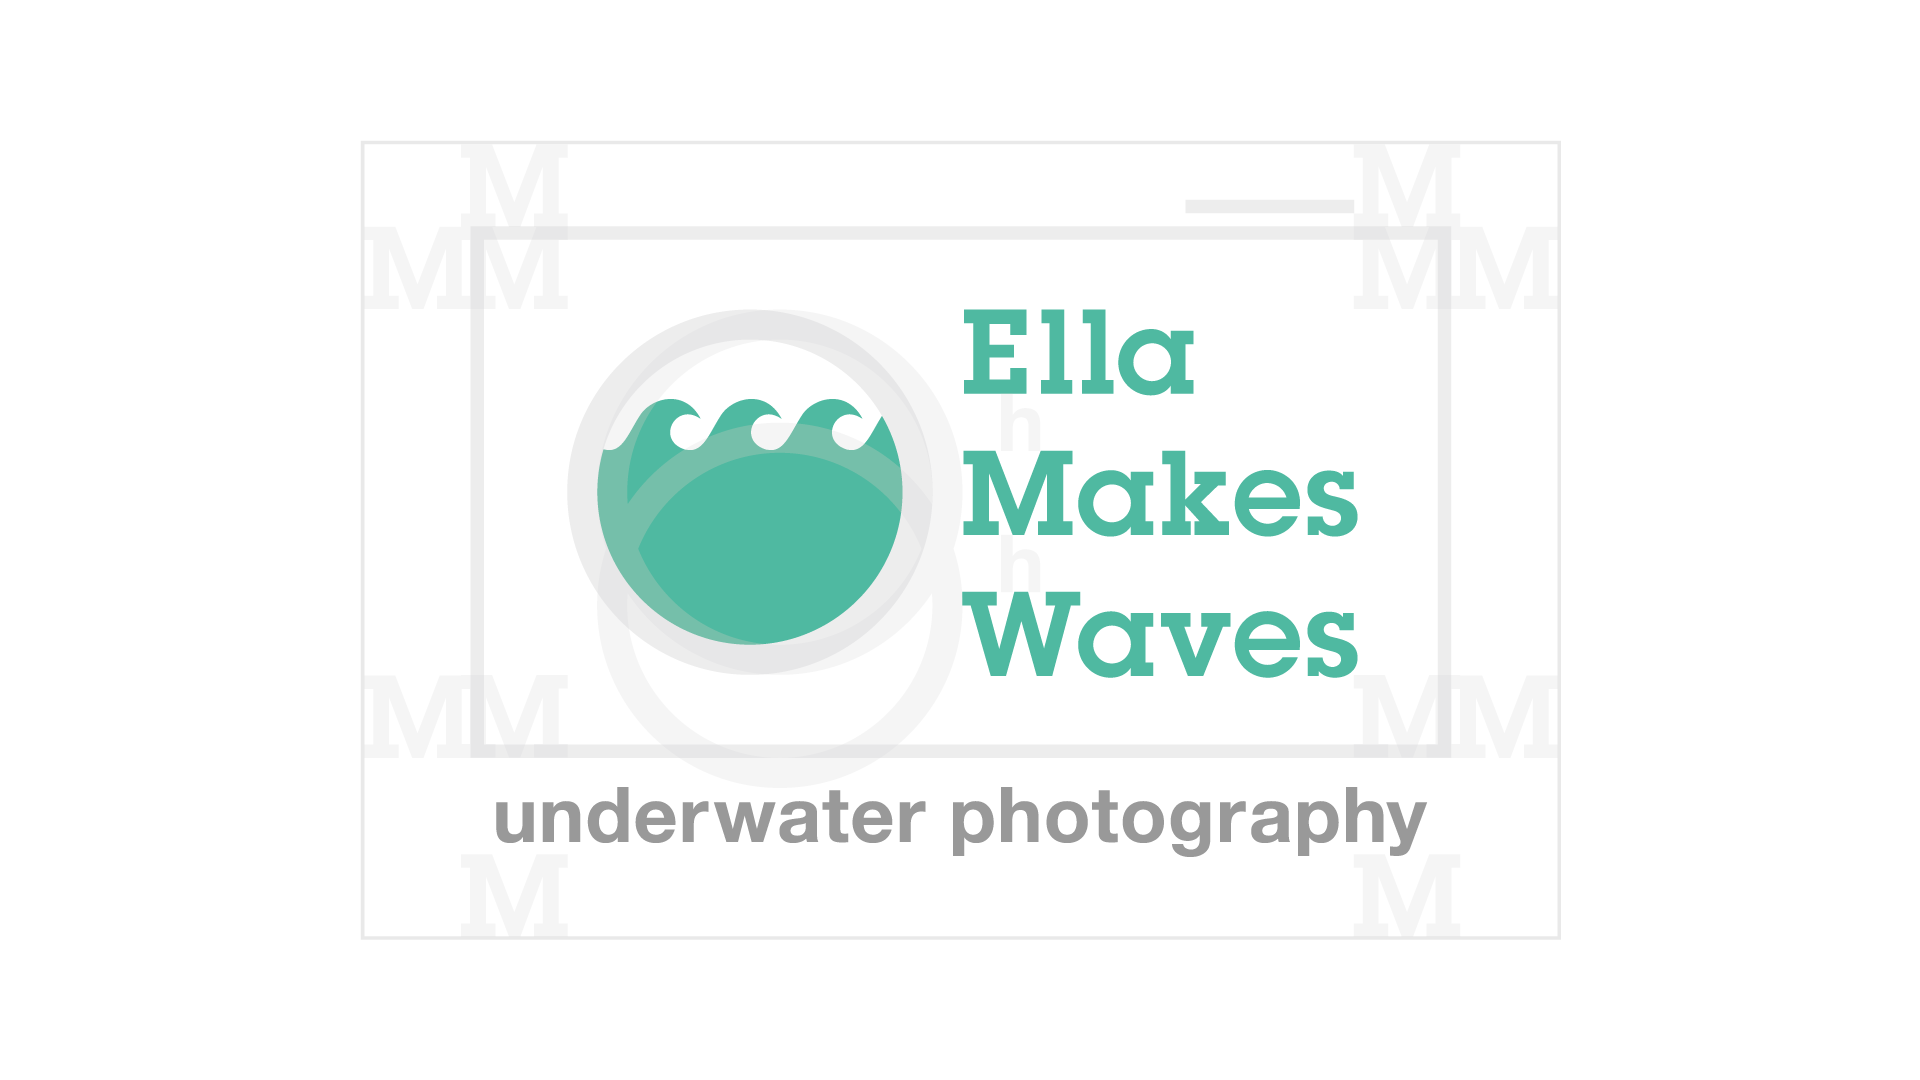 Ella makes waves logo showing guides to place logo elements